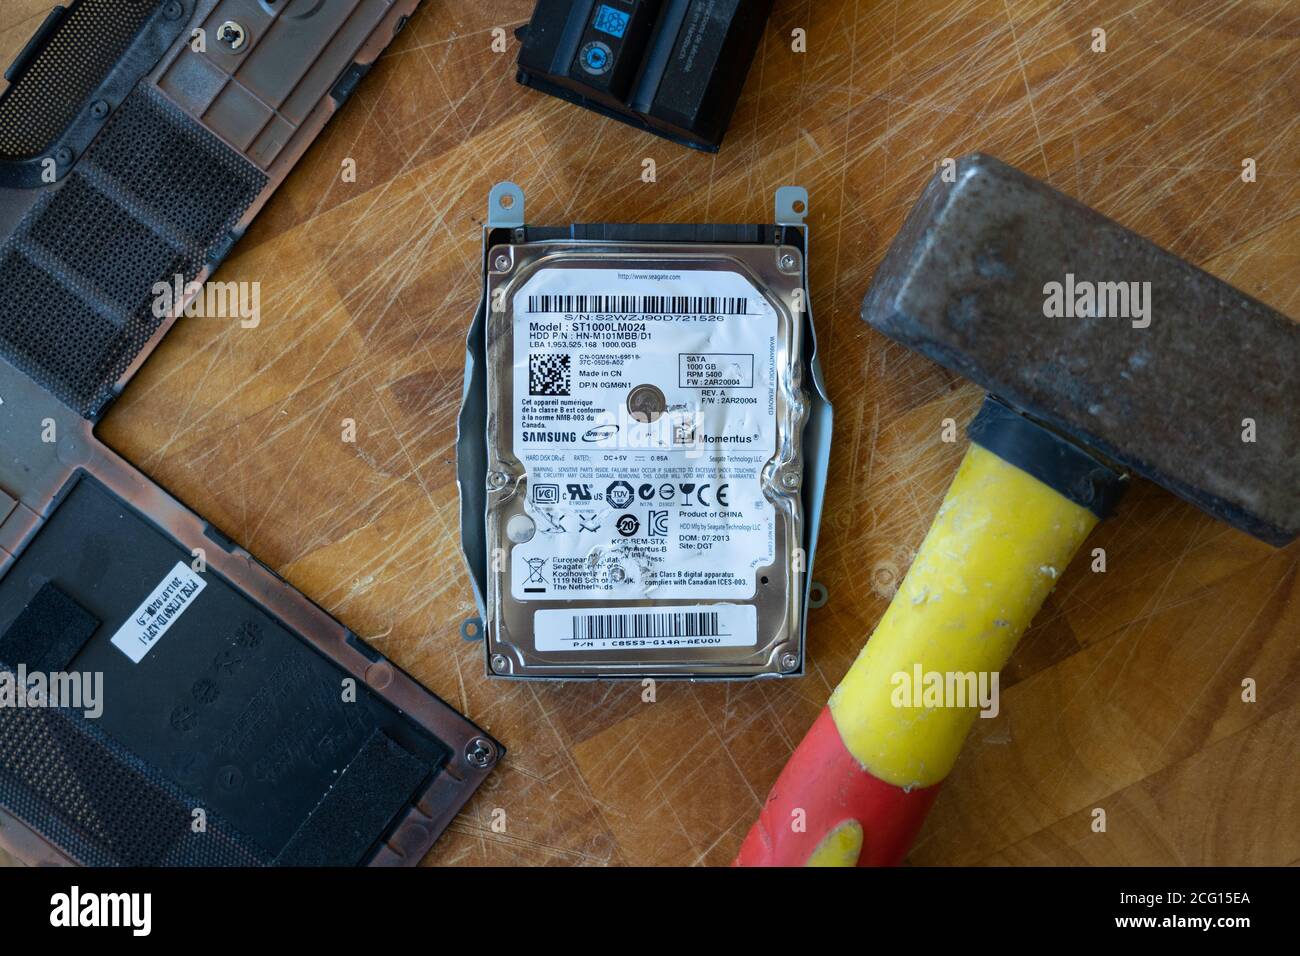 A hammer used to destroy a hard disk drive (HDD) by hammering it. Theme: data security personal data, wiping, deleting, technology, anger, frustration Stock Photo